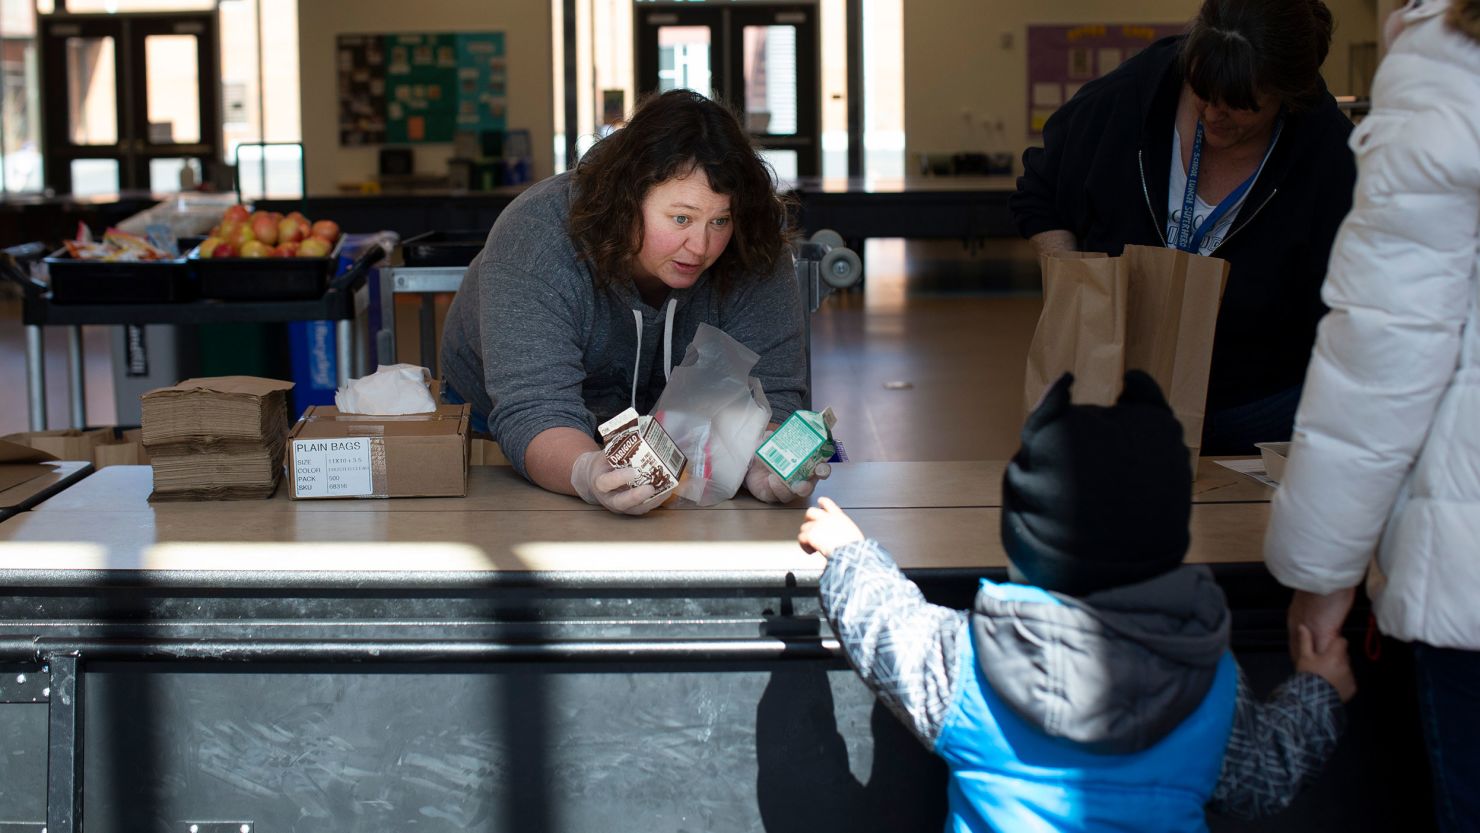 SEATTLE, WA - MARCH 18: Christy Cusick hands out free school lunches to kids and their parents at Olympic Hills Elementary School on March 18, 2020 in Seattle, Washington. As a result of all schools in Washington state being closed due to the COVID-19 outbreak until at least April 27th, Seattle Public Schools is providing carry-out meals to students during lunch hours. (Photo by Karen Ducey/Getty Images)